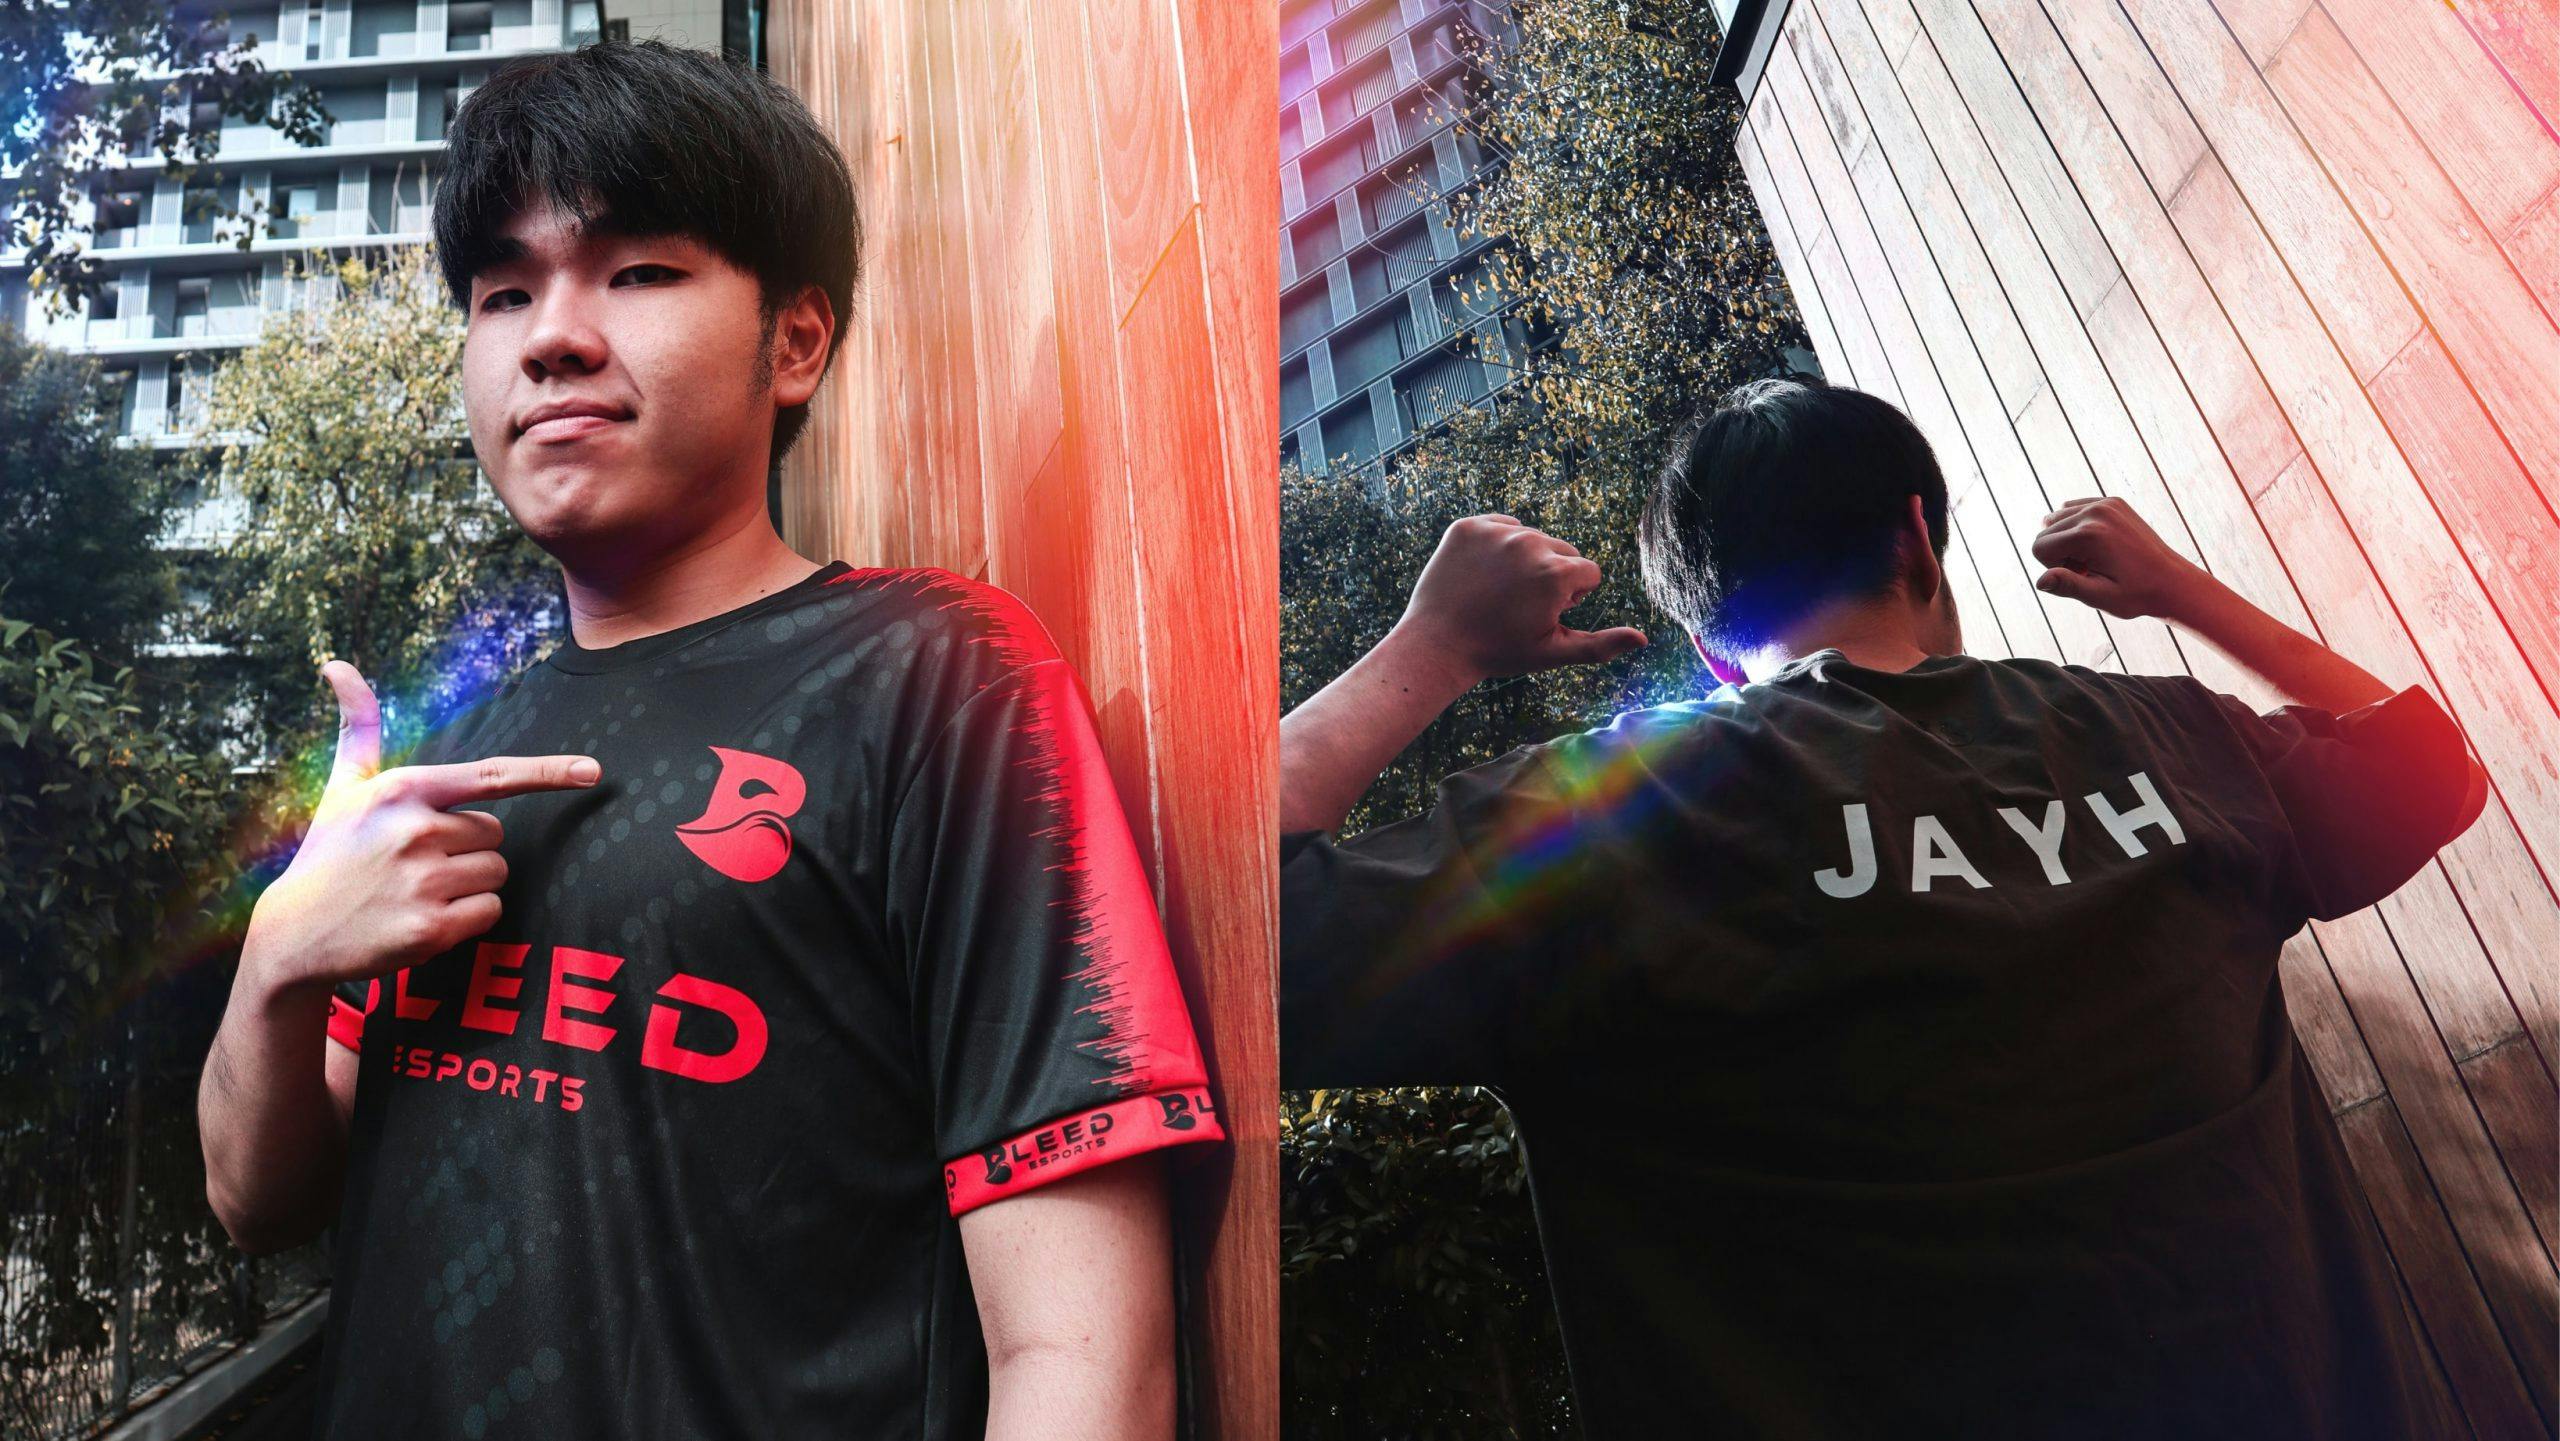 Disguised's JayH temporarily suspended due to matchfixing